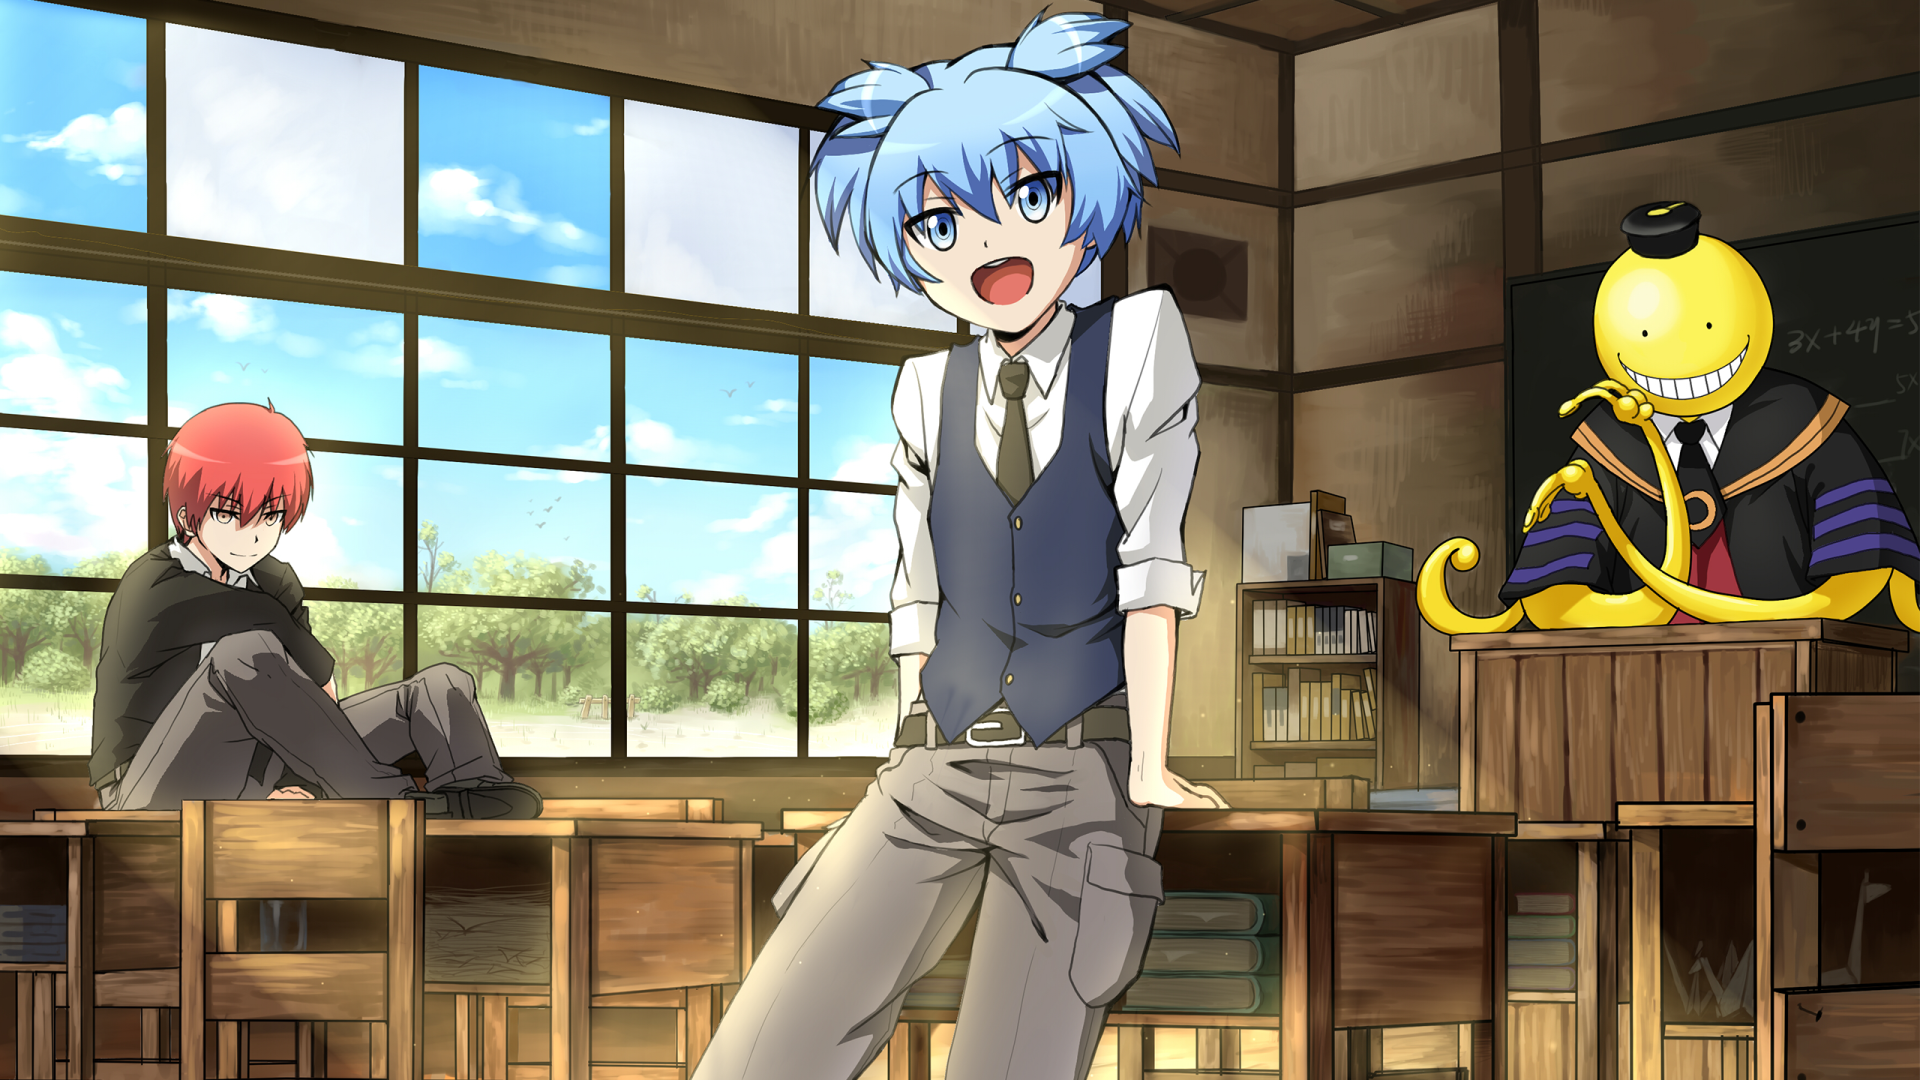 Assassination Classroom HD Wallpaper | Background Image | 2560x1440 | ID:687923 - Wallpaper Abyss